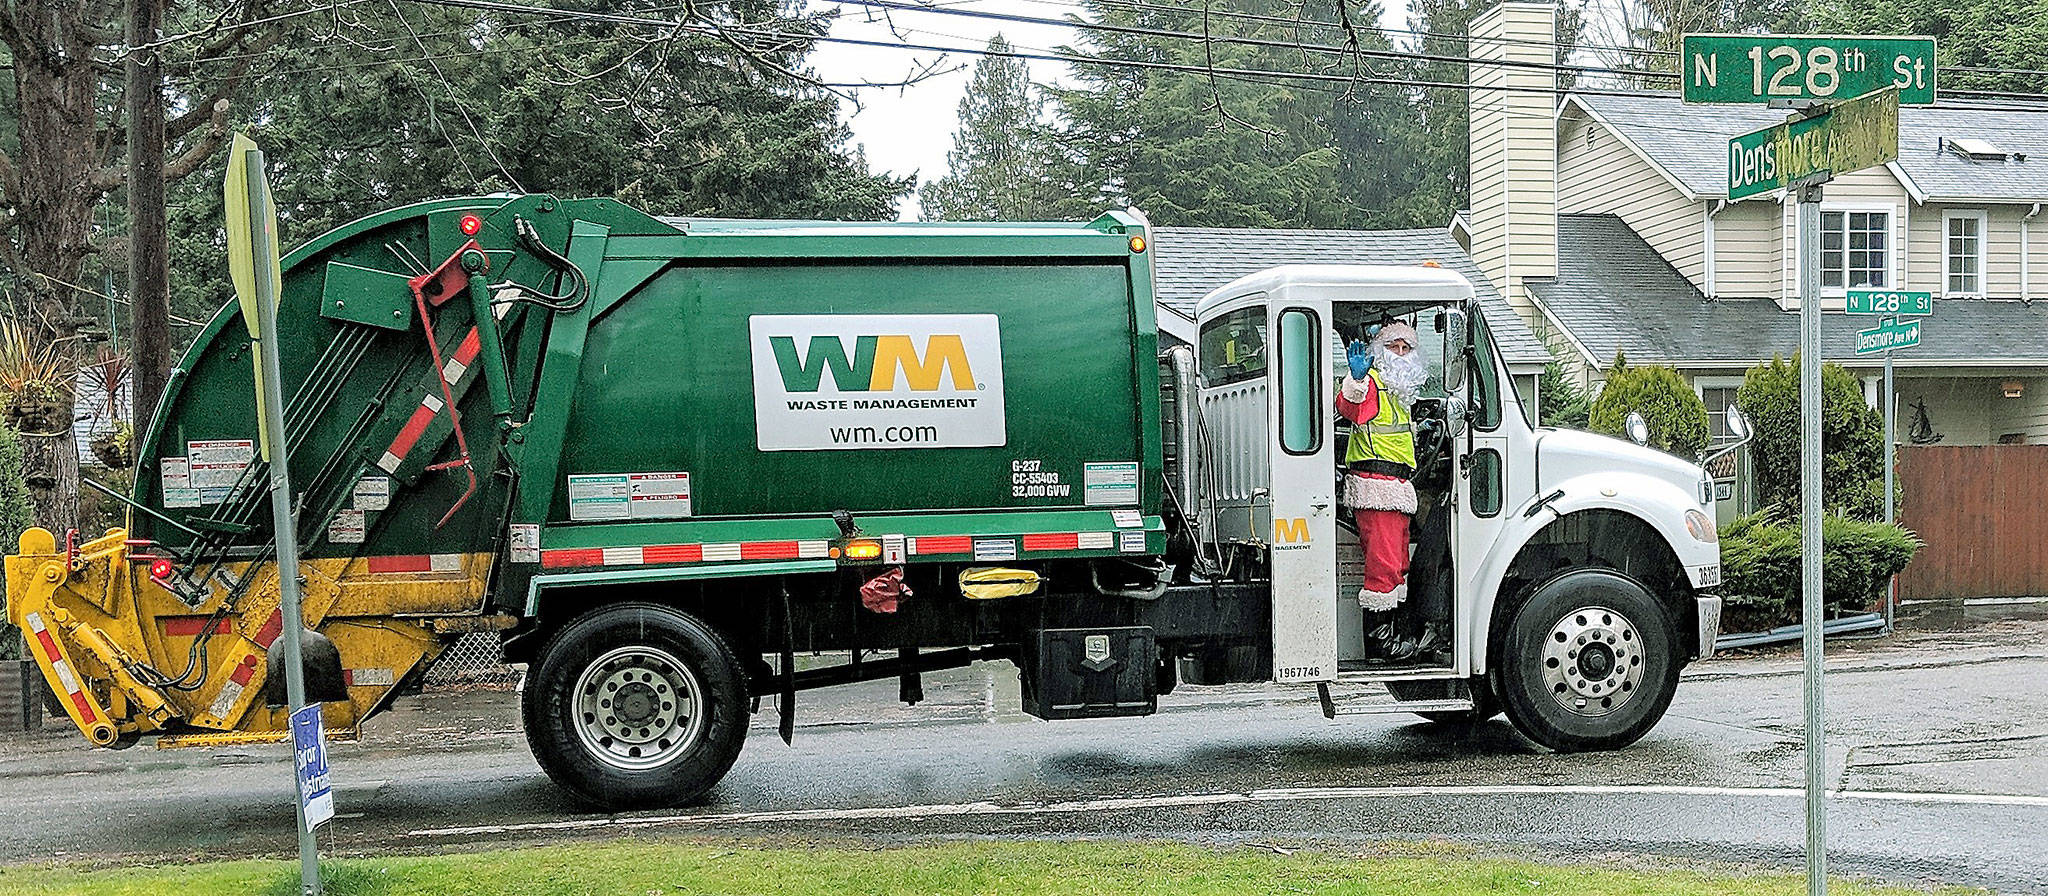 Saint Nic: Waste Management truck driver Nic Greer makes his rounds and spreads holiday cheer throughout Auburn neighborhoods. COURTESY PHOTO, WM